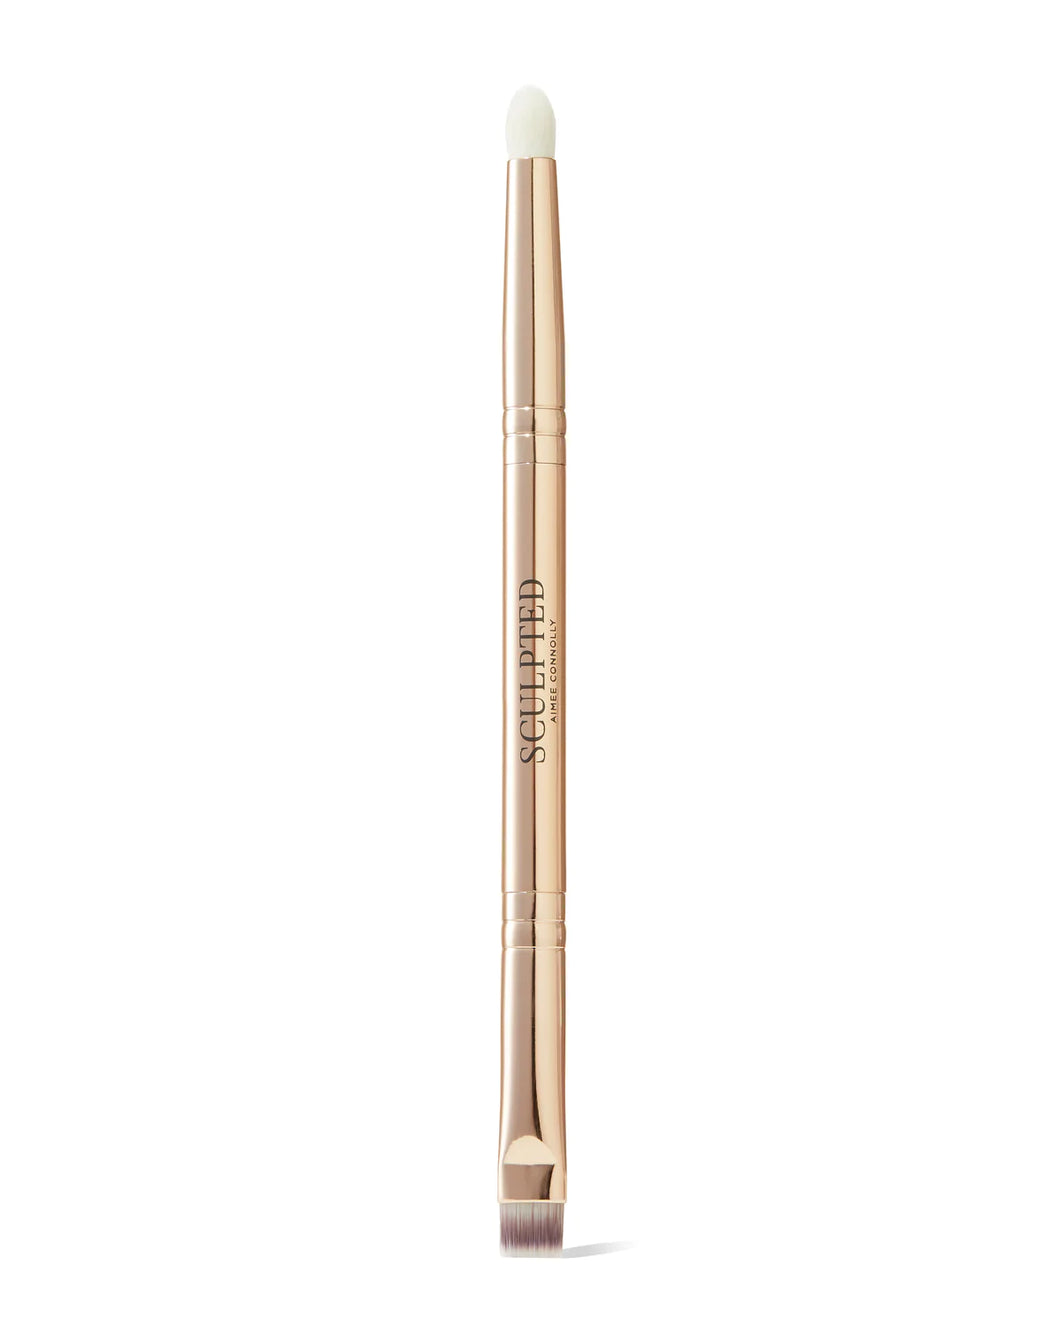 Sculpted by Aimee Definer Duo Brush